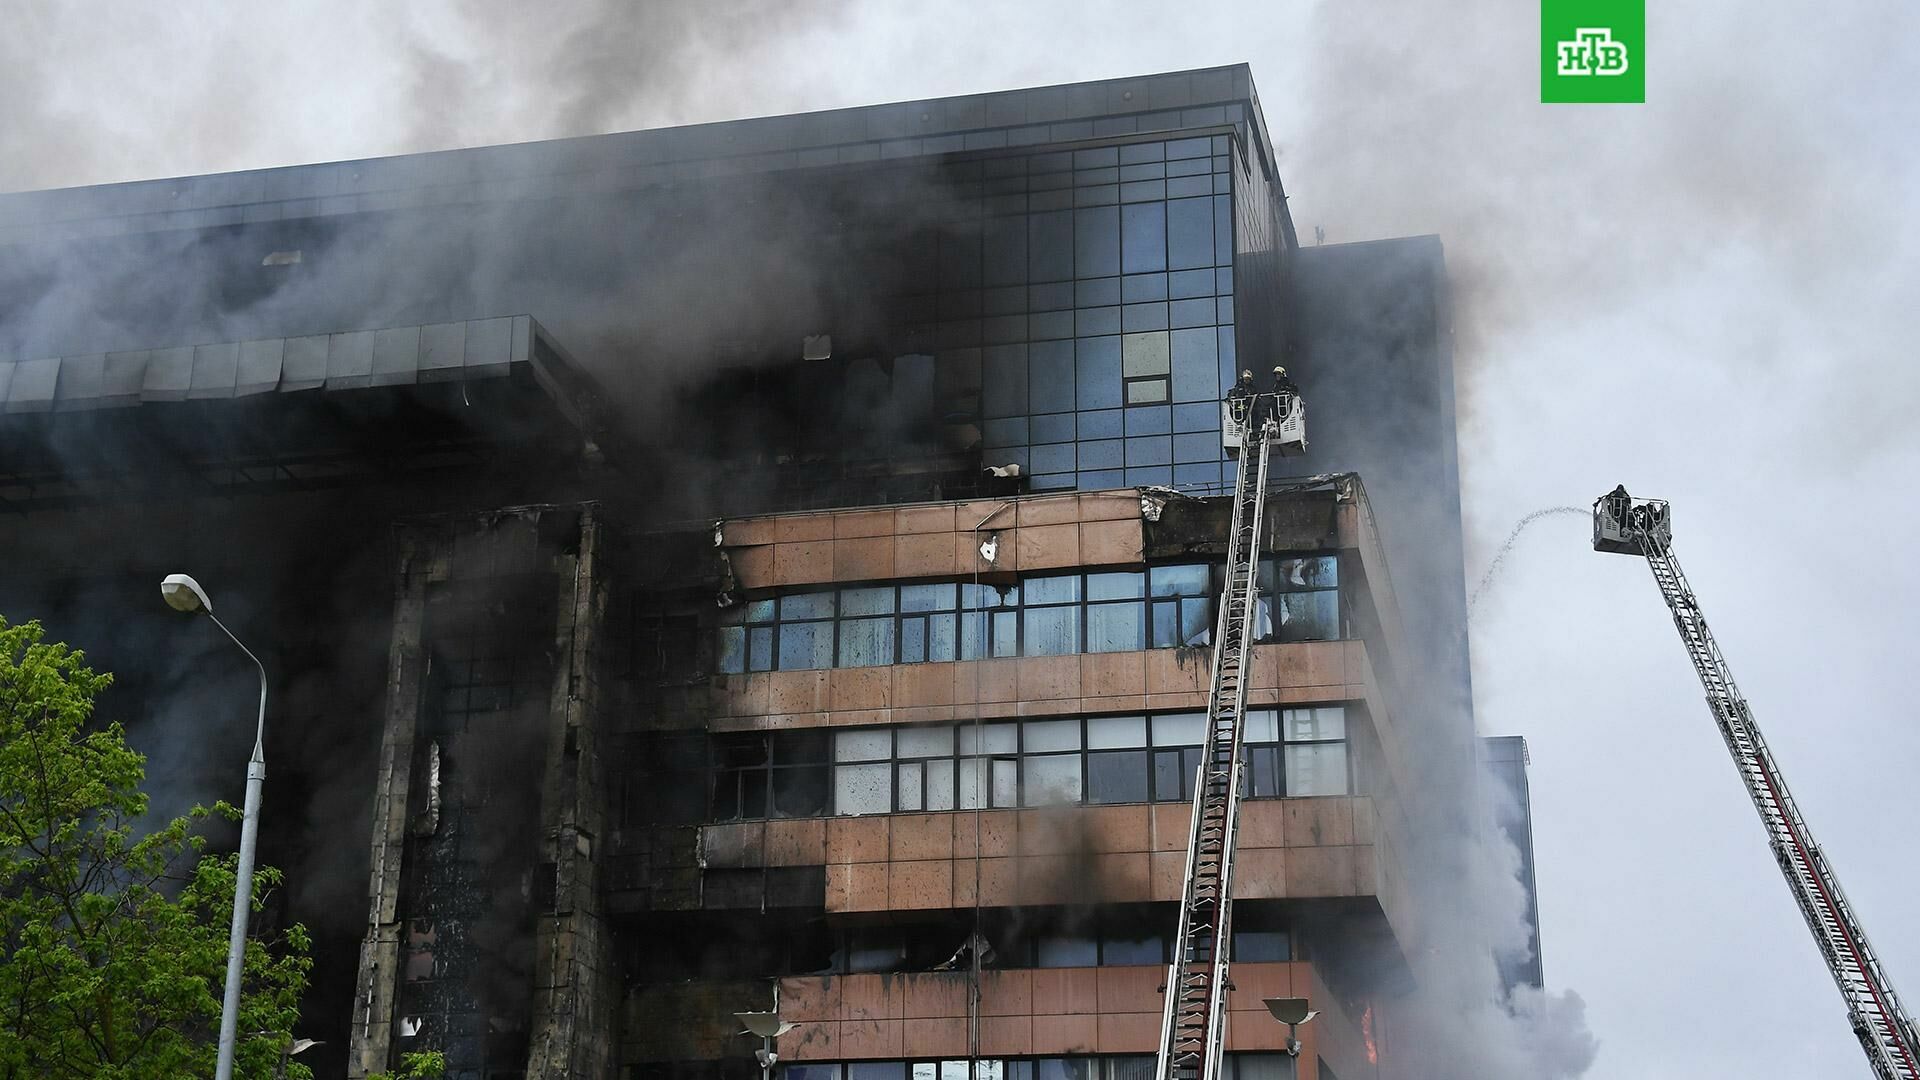 Question of the Day: why are business centers with ventilated facades on fire so badly?